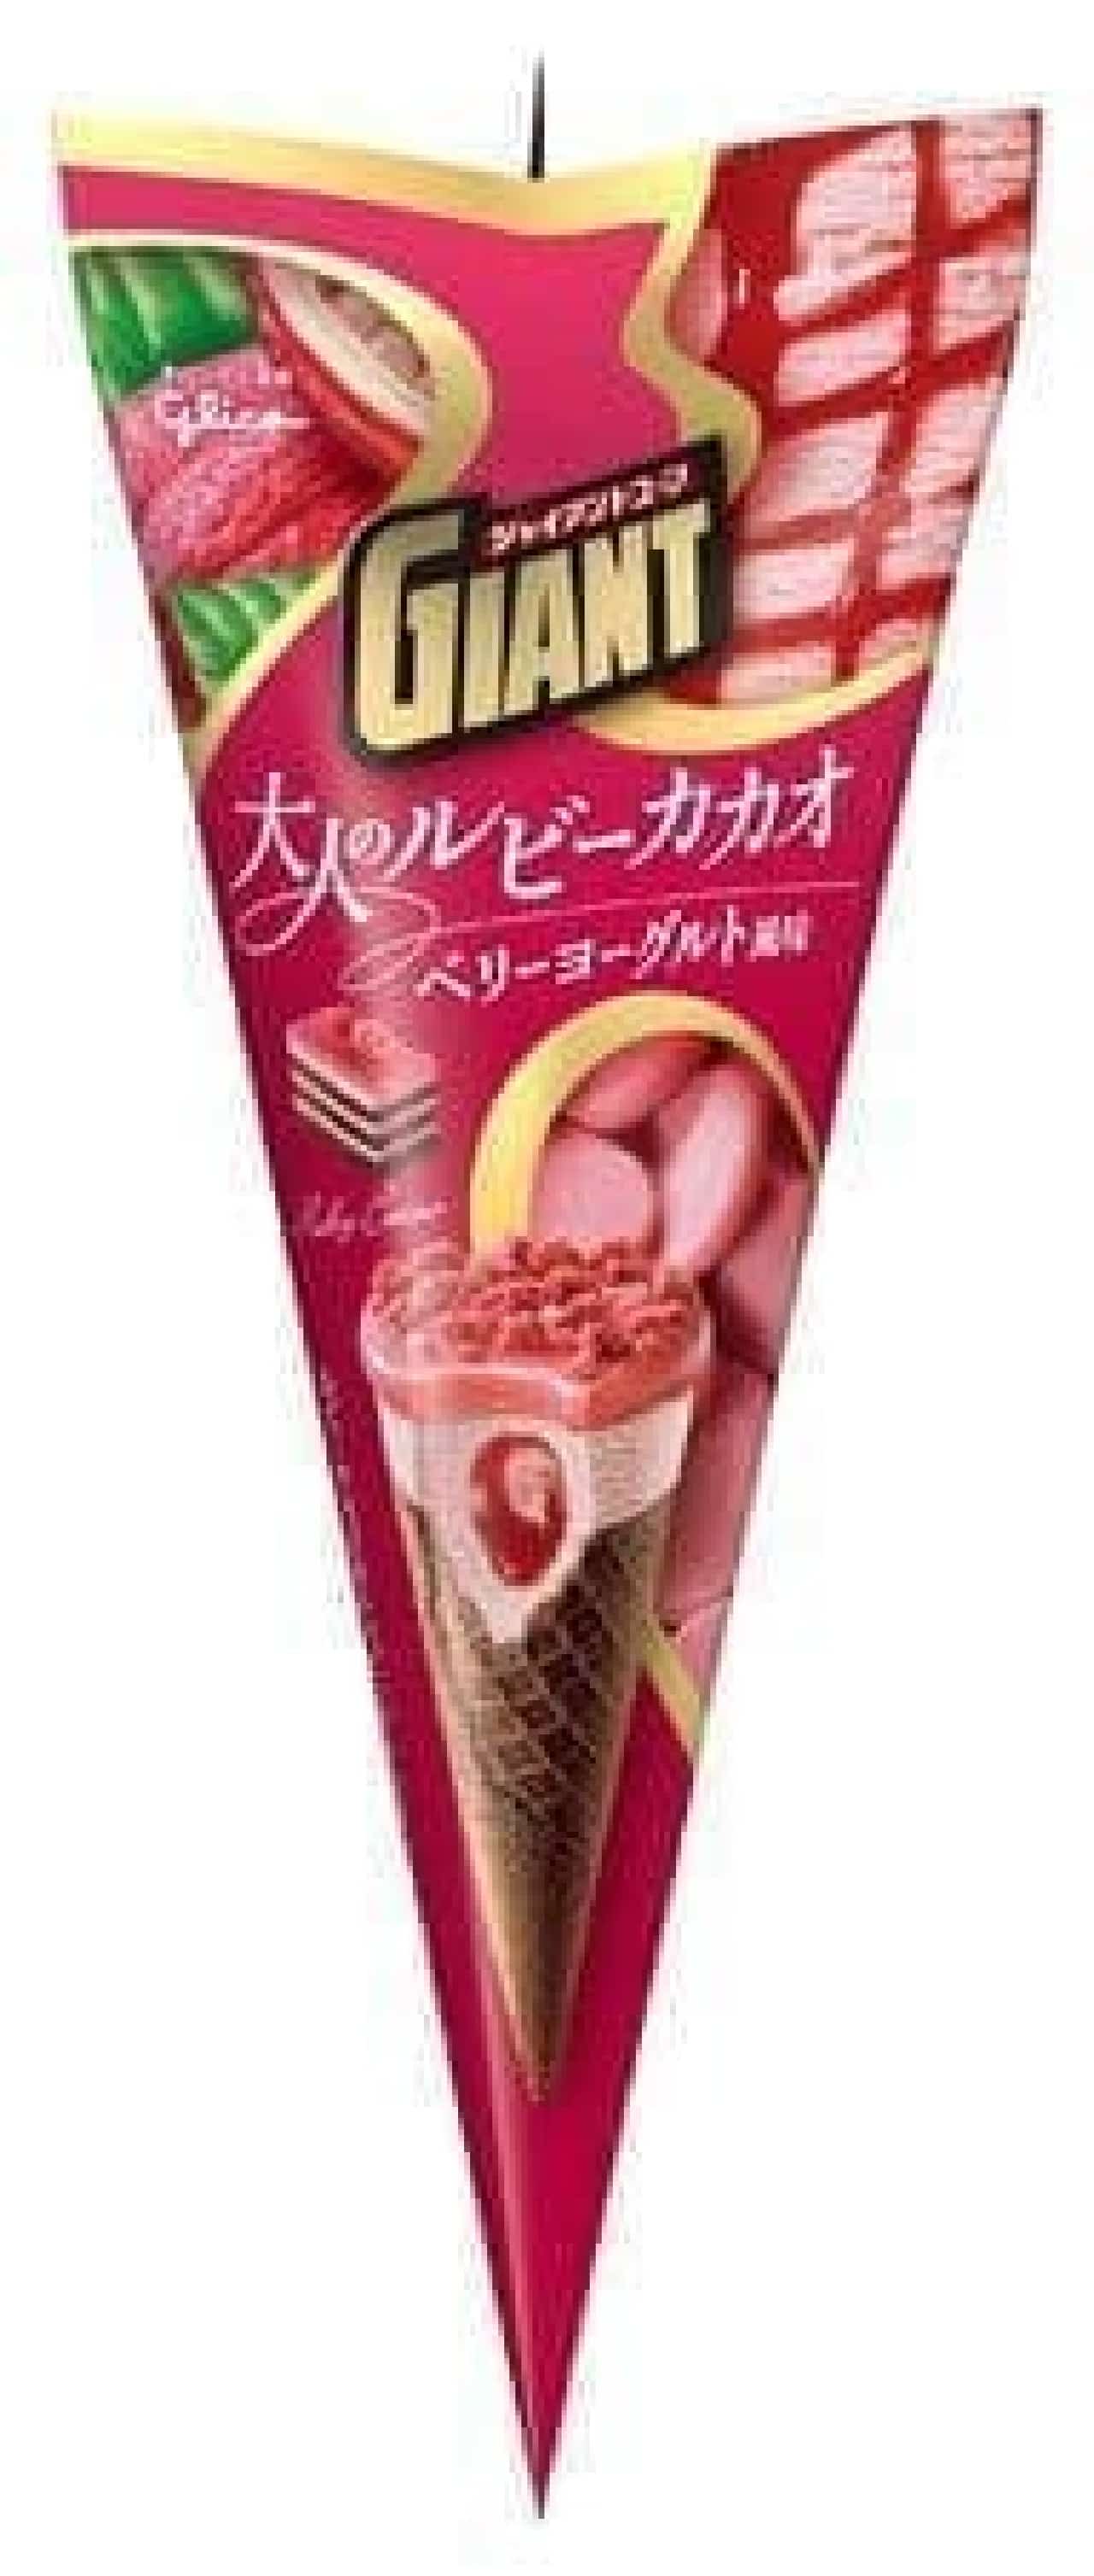 Giant Cone [Adult Ruby Cacao] Berry Yogurt Flavor